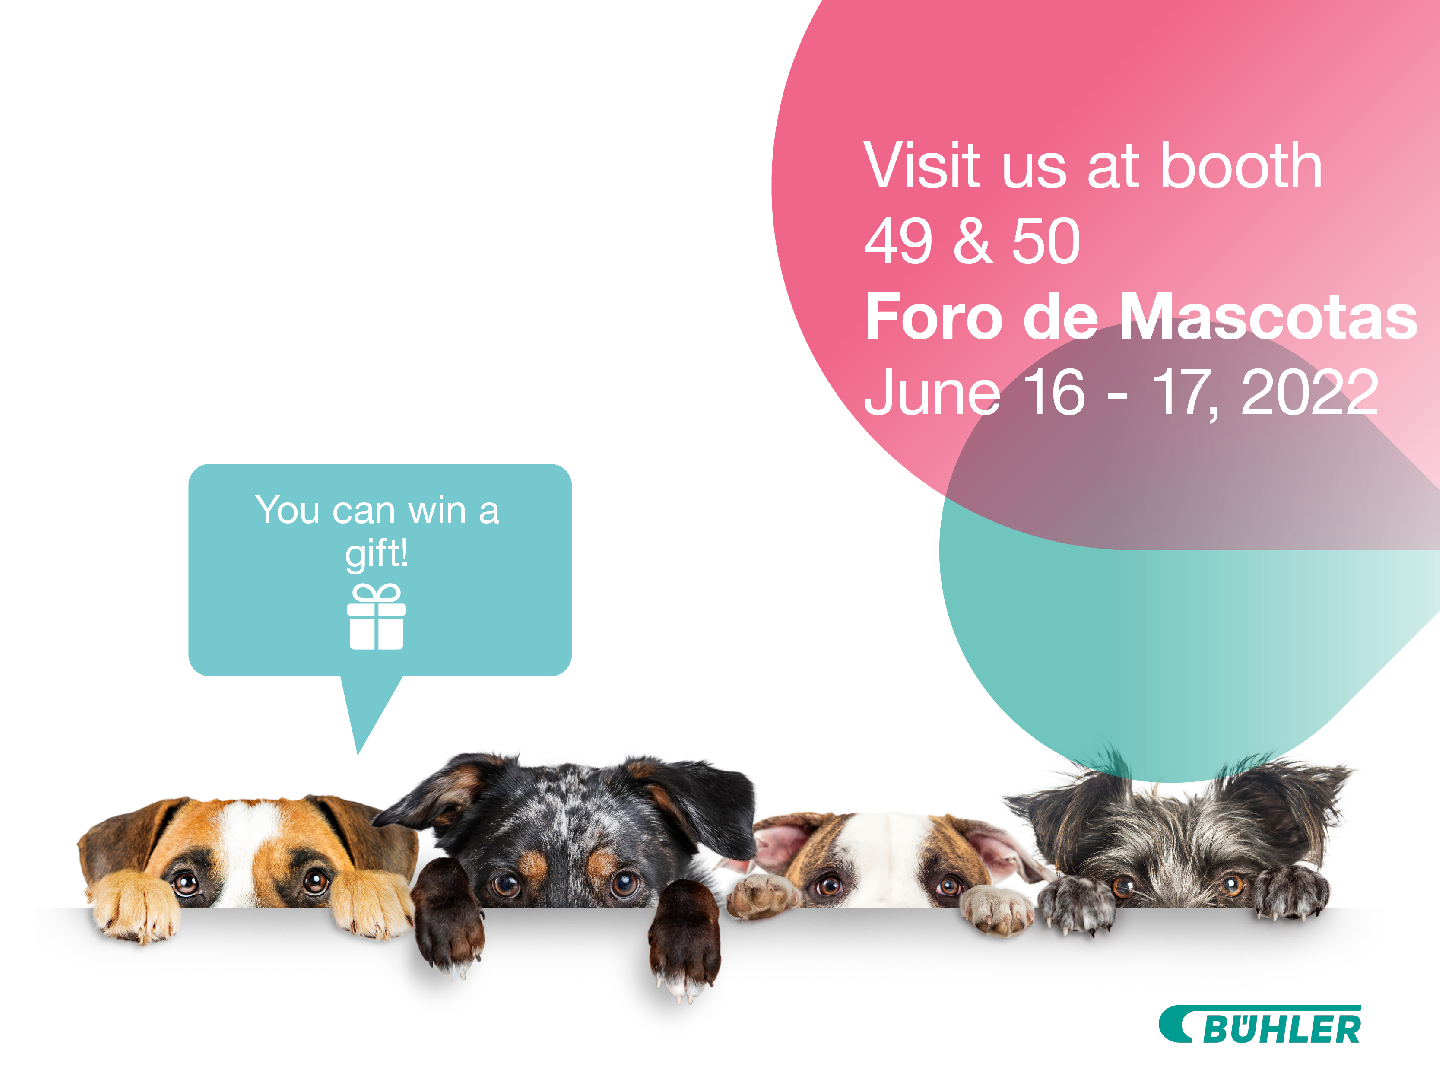 Bühler invites you to participate in an event focused on trends in pet food industry!